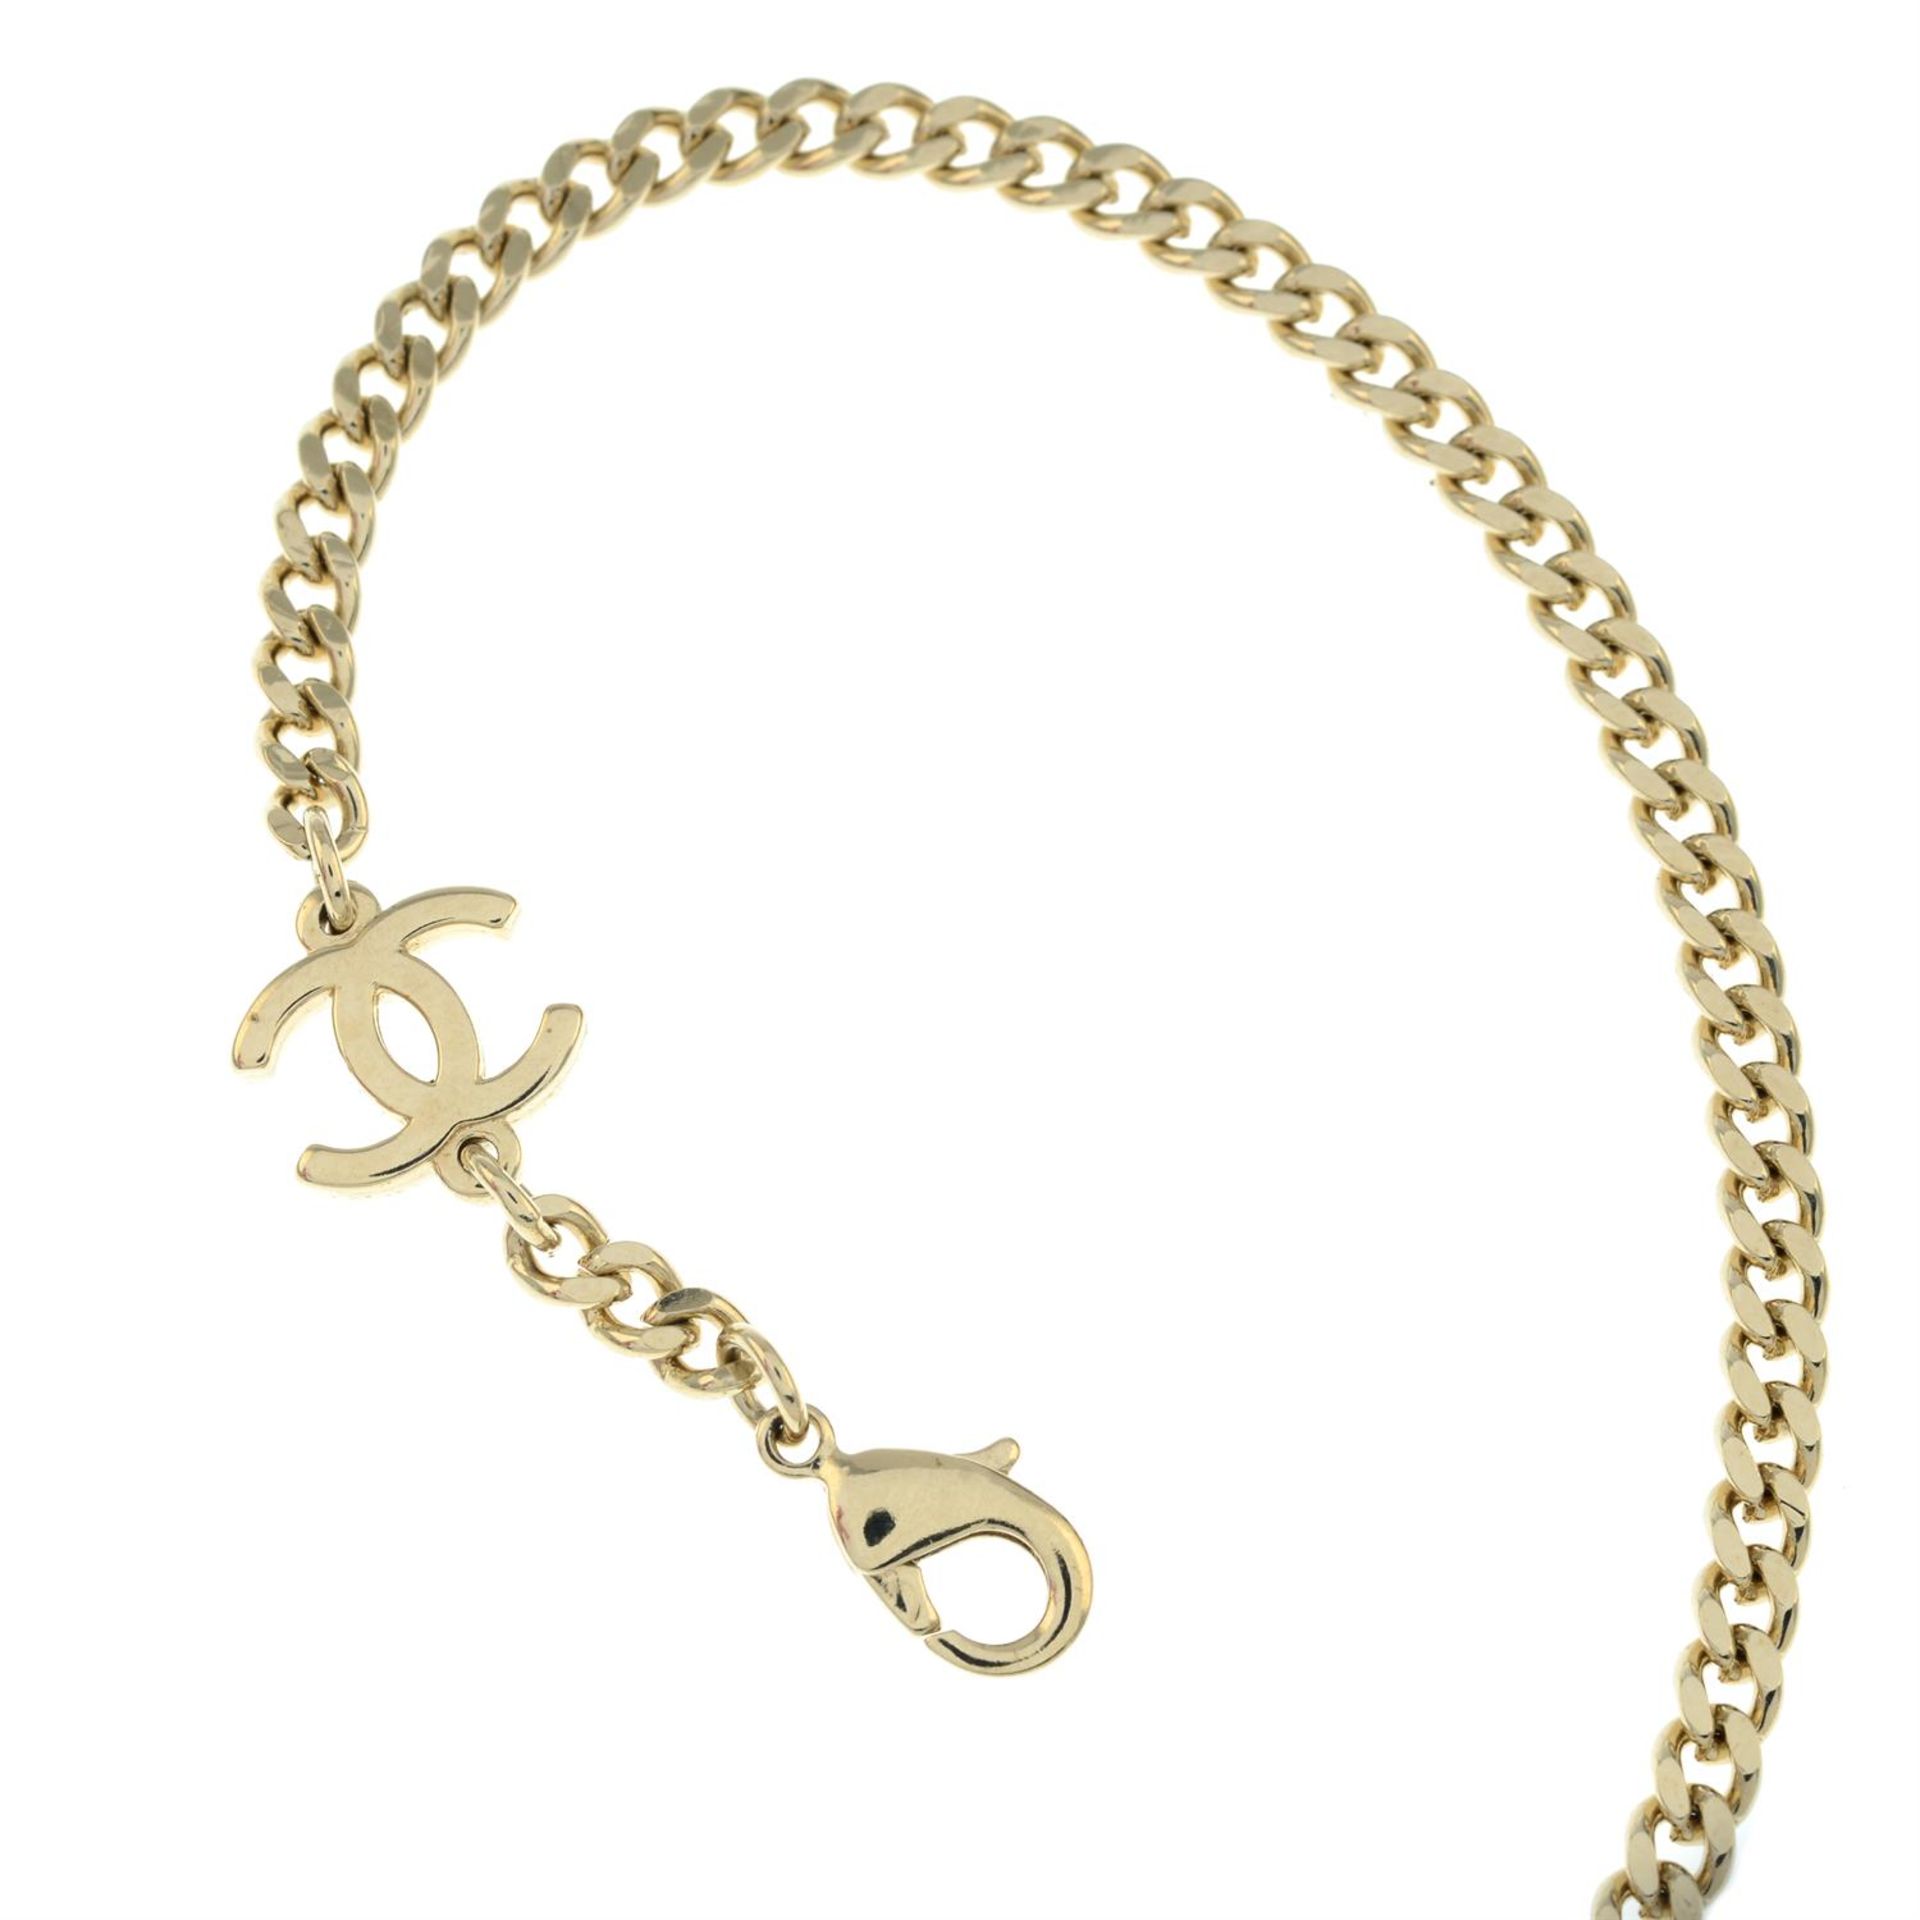 CHANEL - a glasses chain. - Image 2 of 2